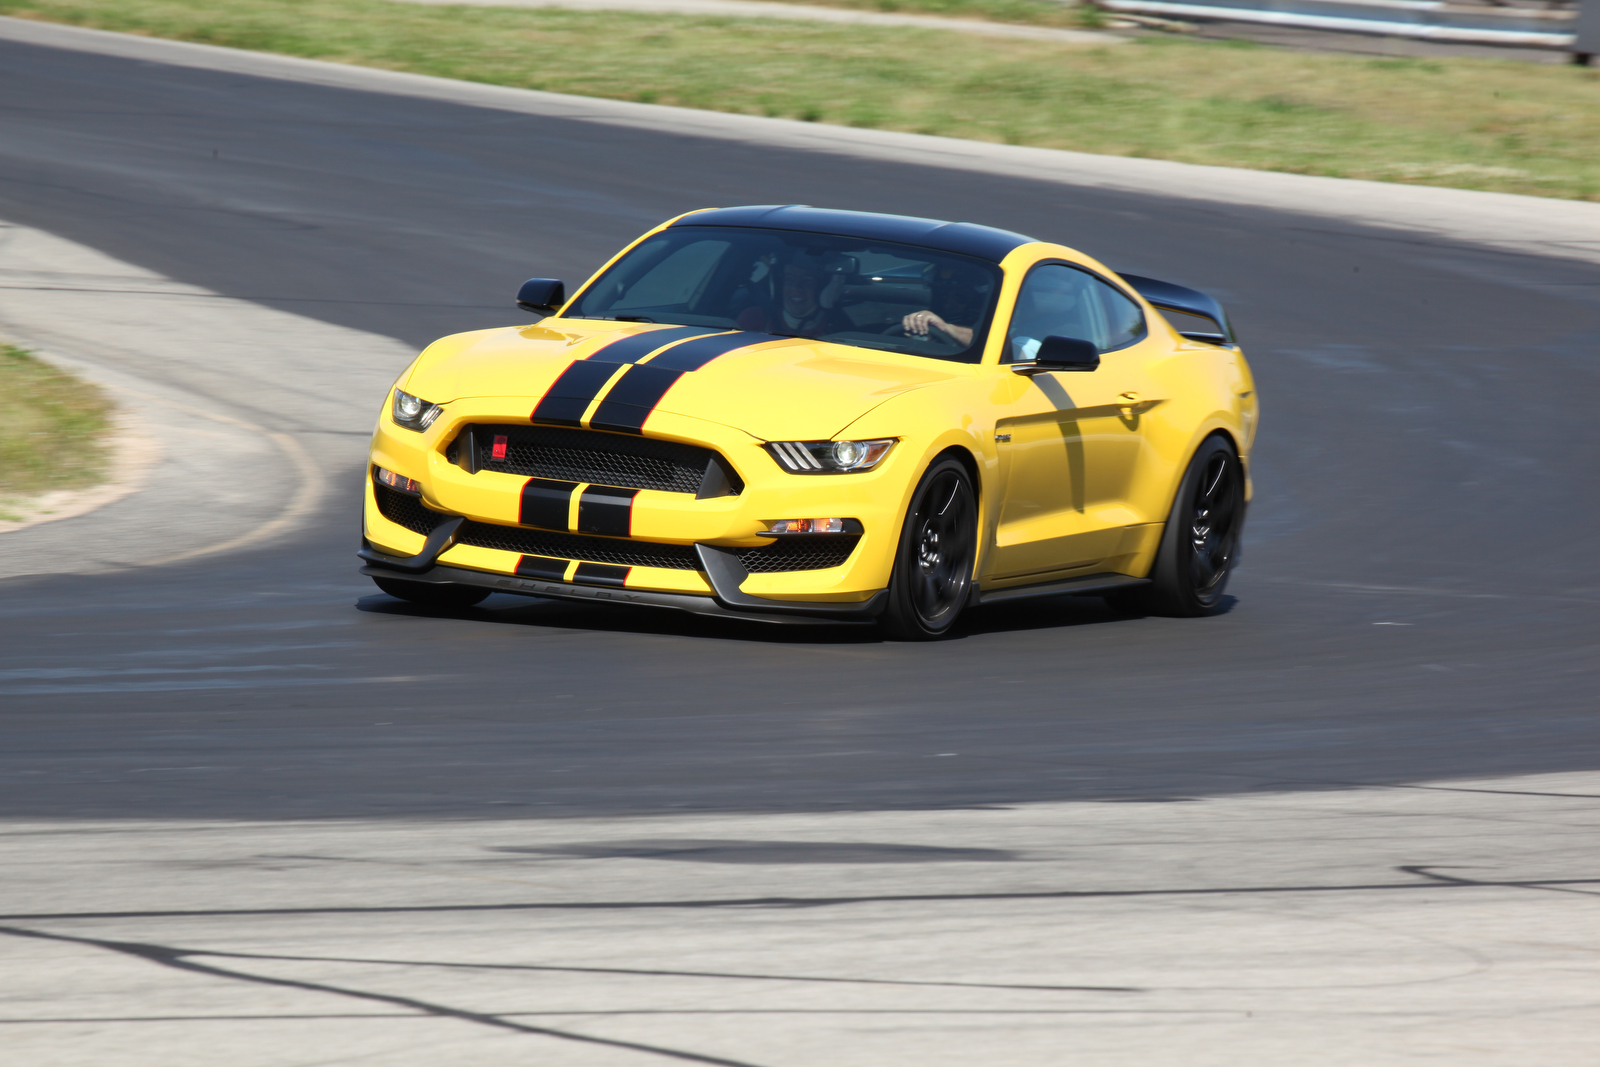 Driven: 2016 Ford Shelby GT350. The Magic Mustang.